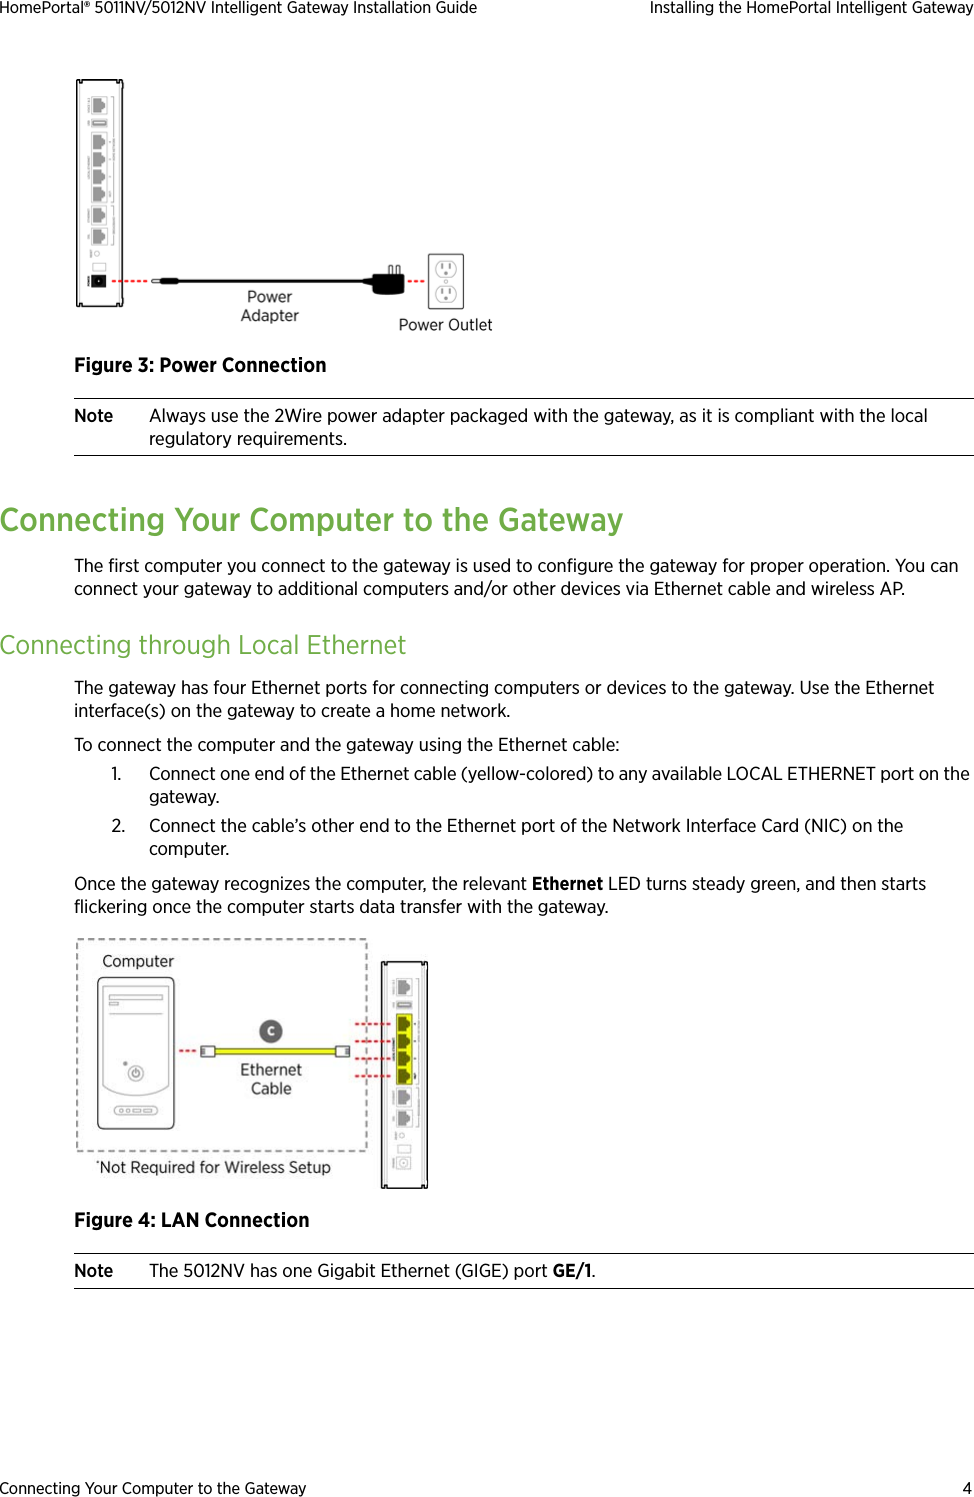 Connecting Your Computer to the Gateway 4HomePortal® 5011NV/5012NV Intelligent Gateway Installation Guide Installing the HomePortal Intelligent GatewayFigure 3: Power ConnectionNote Always use the 2Wire power adapter packaged with the gateway, as it is compliant with the local regulatory requirements.Connecting Your Computer to the GatewayThe first computer you connect to the gateway is used to configure the gateway for proper operation. You can connect your gateway to additional computers and/or other devices via Ethernet cable and wireless AP.Connecting through Local EthernetThe gateway has four Ethernet ports for connecting computers or devices to the gateway. Use the Ethernet interface(s) on the gateway to create a home network. To connect the computer and the gateway using the Ethernet cable:1. Connect one end of the Ethernet cable (yellow-colored) to any available LOCAL ETHERNET port on the gateway.2. Connect the cable’s other end to the Ethernet port of the Network Interface Card (NIC) on the computer.Once the gateway recognizes the computer, the relevant Ethernet LED turns steady green, and then starts flickering once the computer starts data transfer with the gateway.Figure 4: LAN ConnectionNote The 5012NV has one Gigabit Ethernet (GIGE) port GE/1.